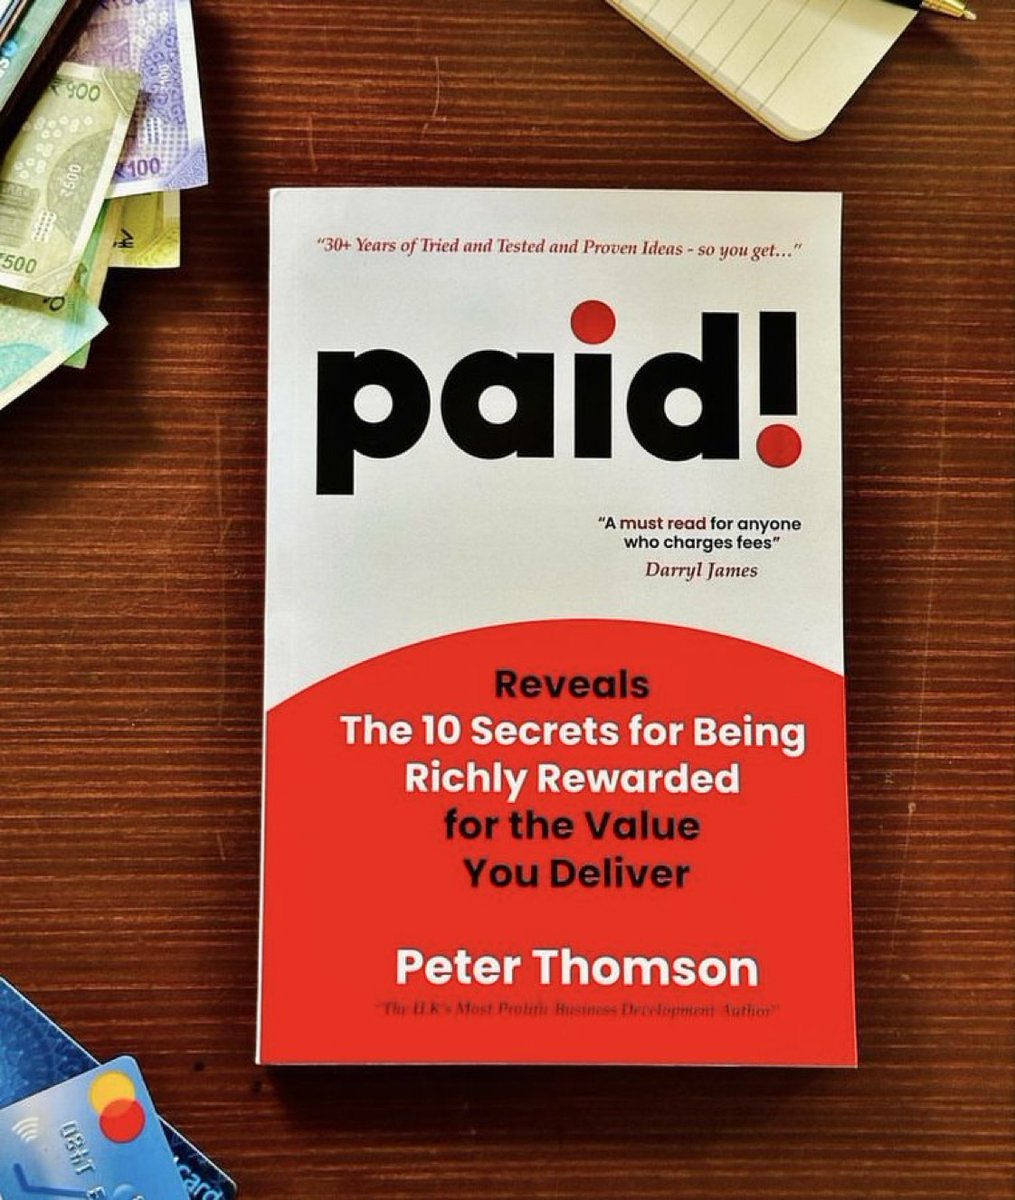 8 Powerful Lessons From… “PAID! by Peter Thomson” •Thread•